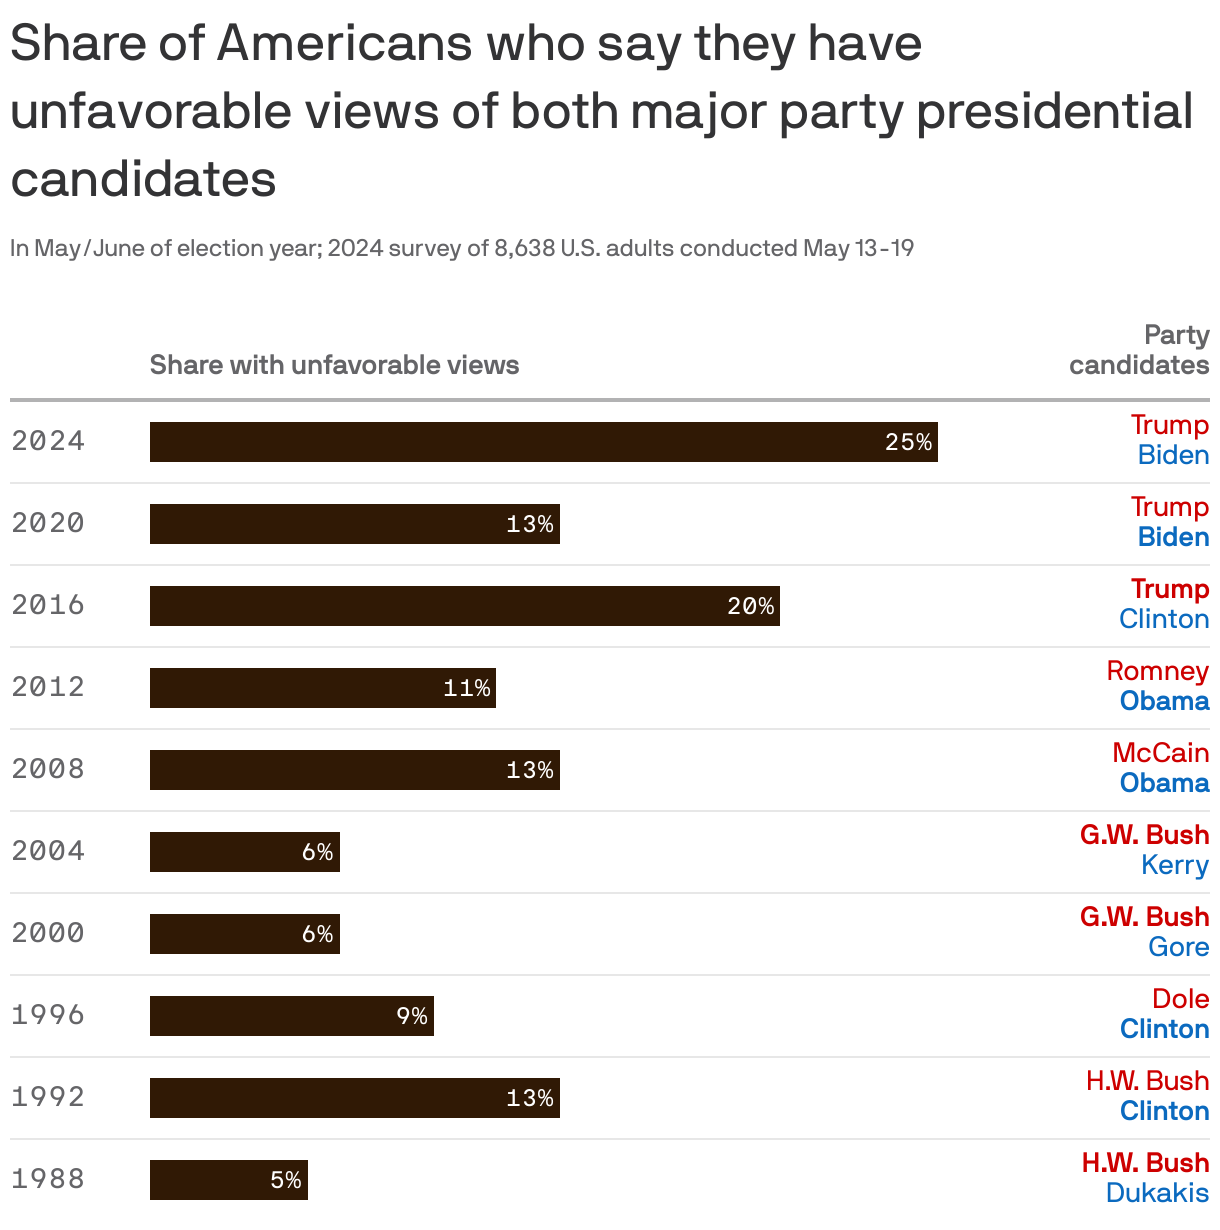 The table shows the views of major party candidates in May/June of each presidential election year from 1988 to 2024. In 2024, 25% of Americans have unfavorable views of both major party candidates, which is nearly twice as much who said they did in 2020.